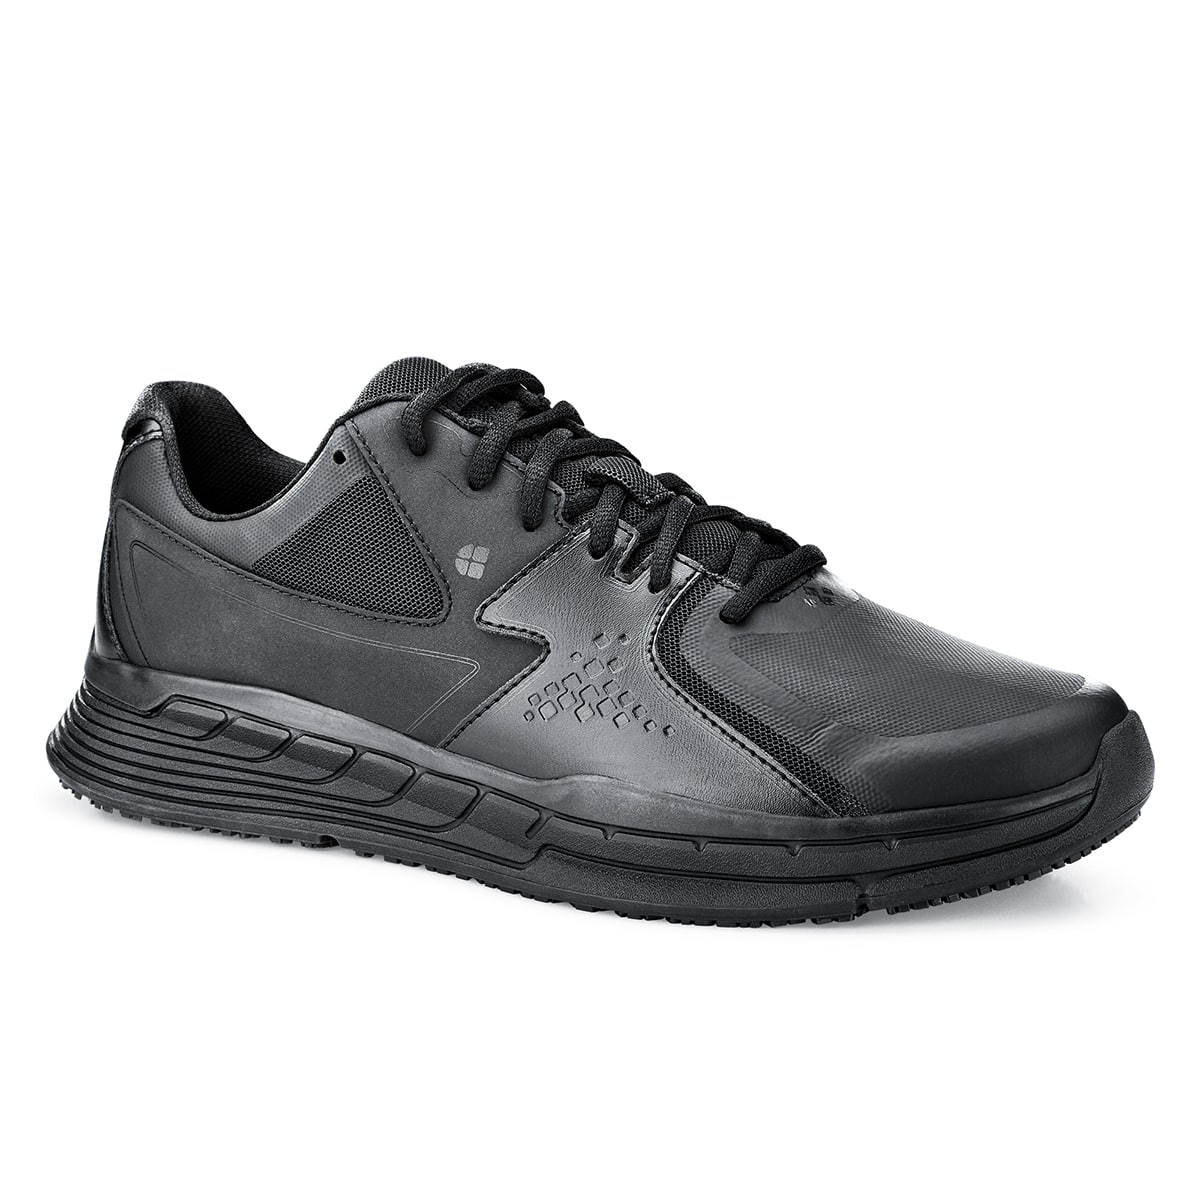 The Condor Men's Black from Shoes for Crews is a slip-resistant shoe with laces, with additional padding and a removable cushioned insole, seen from the right profile.